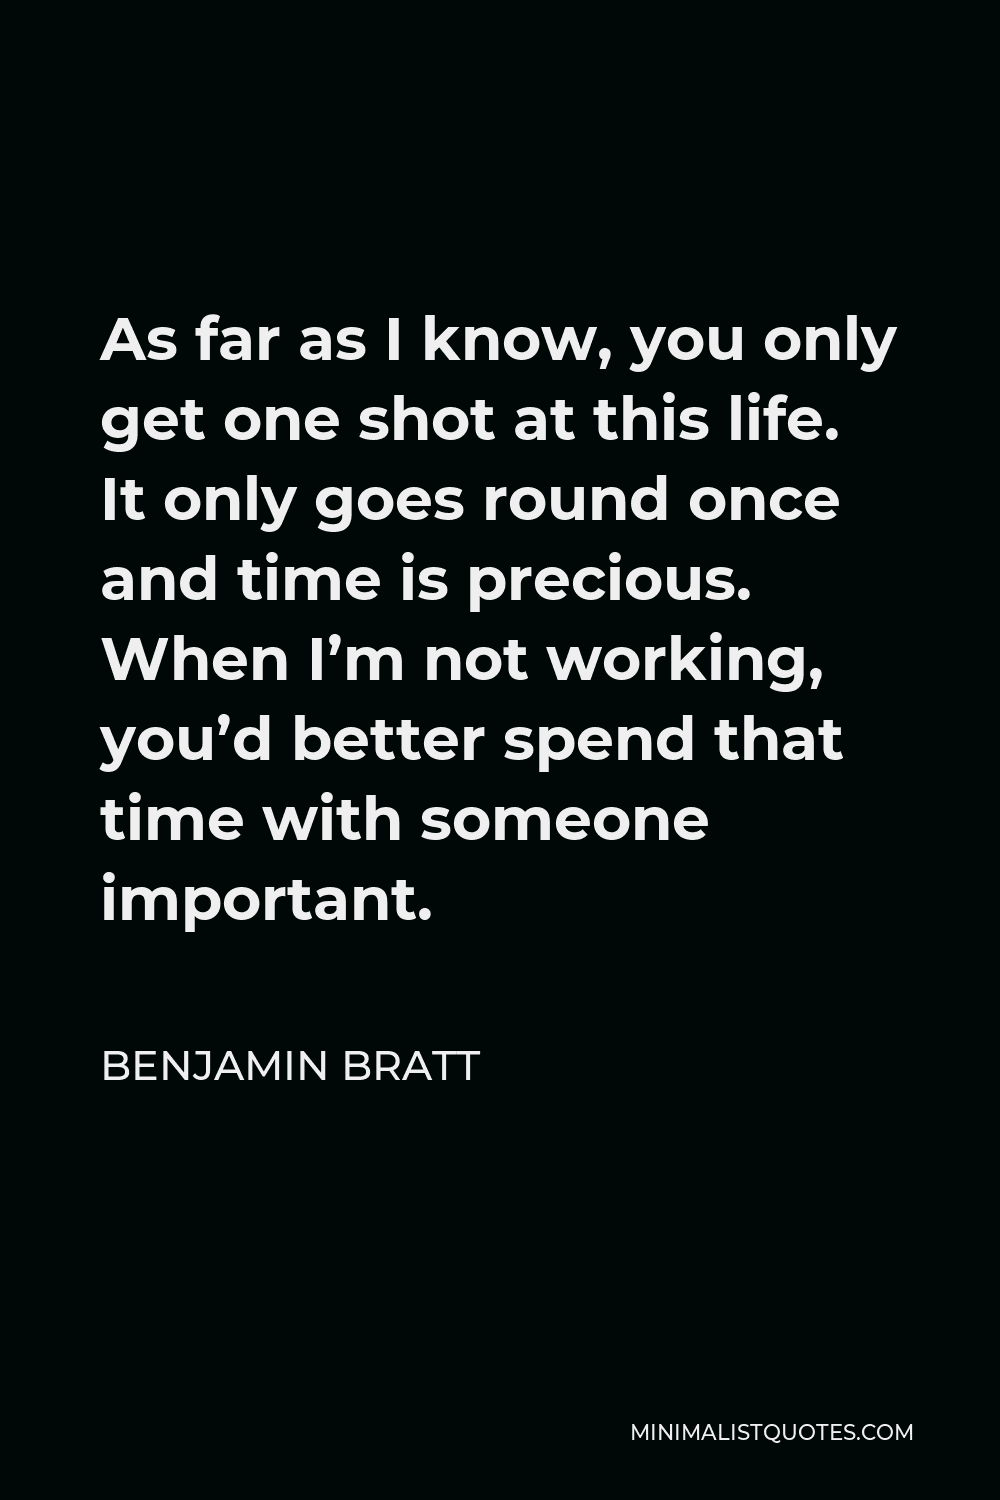 Benjamin Bratt Quote - As far as I know, you only get one shot at this life. It only goes round once and time is precious. When I’m not working, you’d better spend that time with someone important.